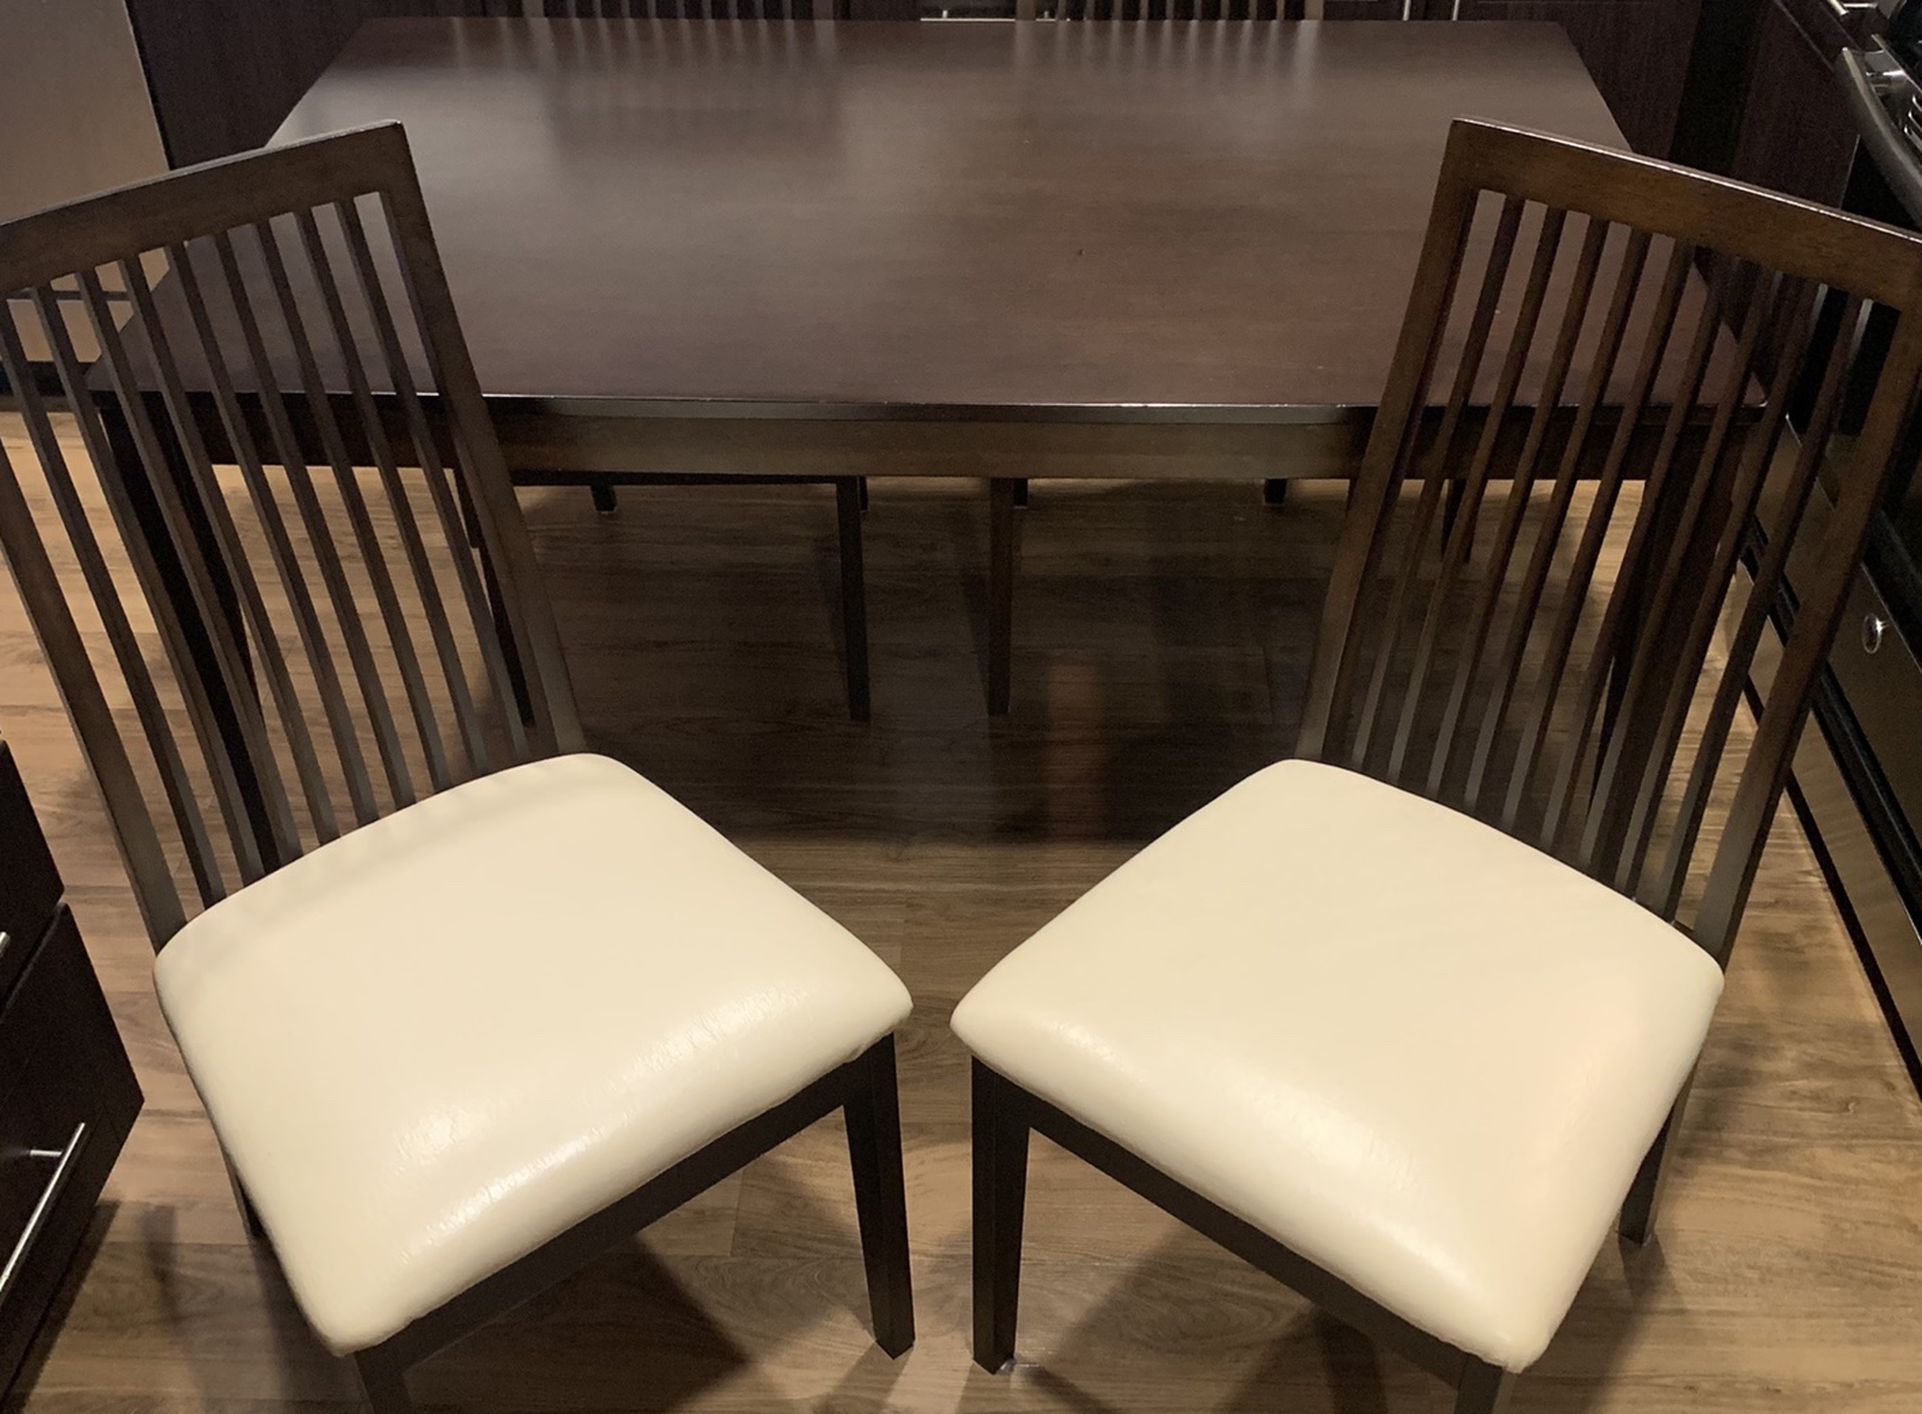 Stunning PRISTINE Condition Japanese Solid Wood Kitchen Table With 4 Leather Chairs - 53”x33.5”x28”